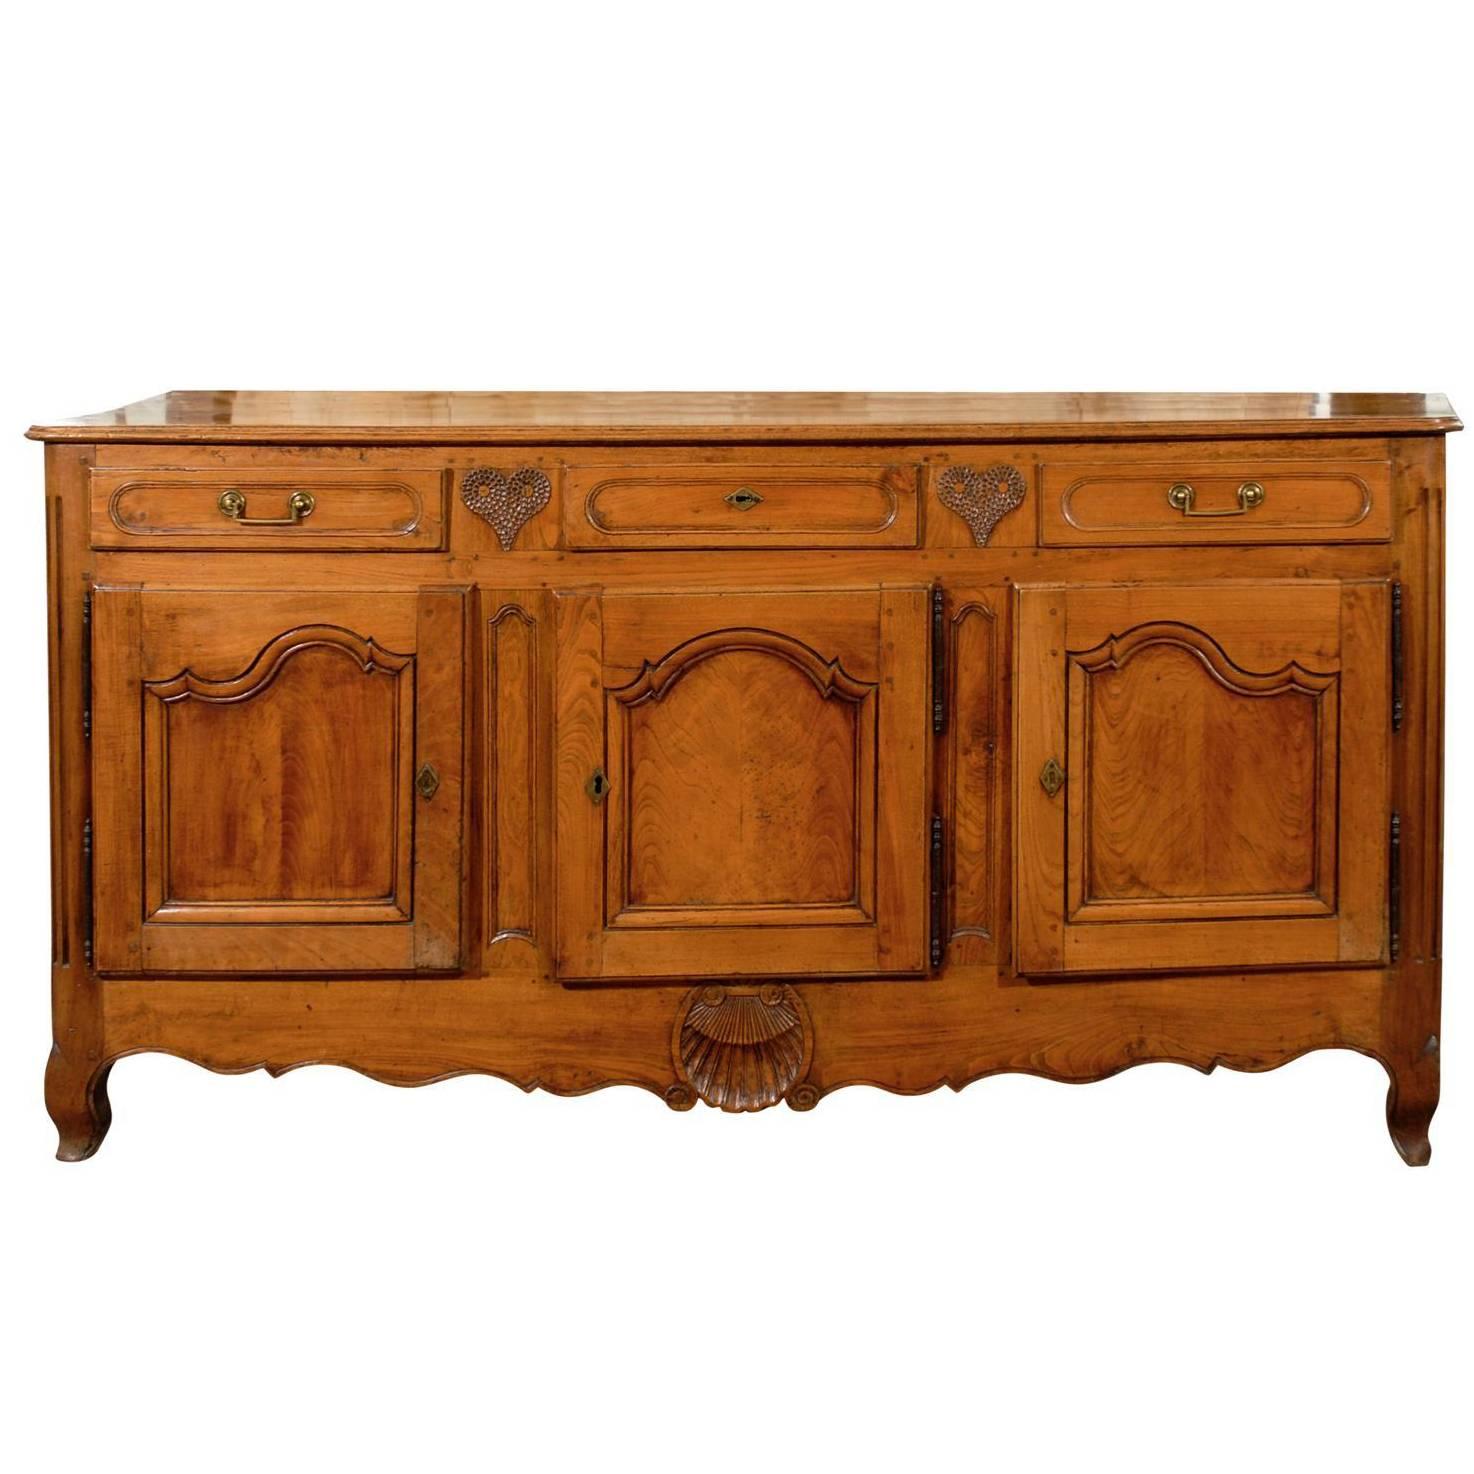 Large 18th Century French Louis XV Fruitwood and Elm Enfilade with Carving